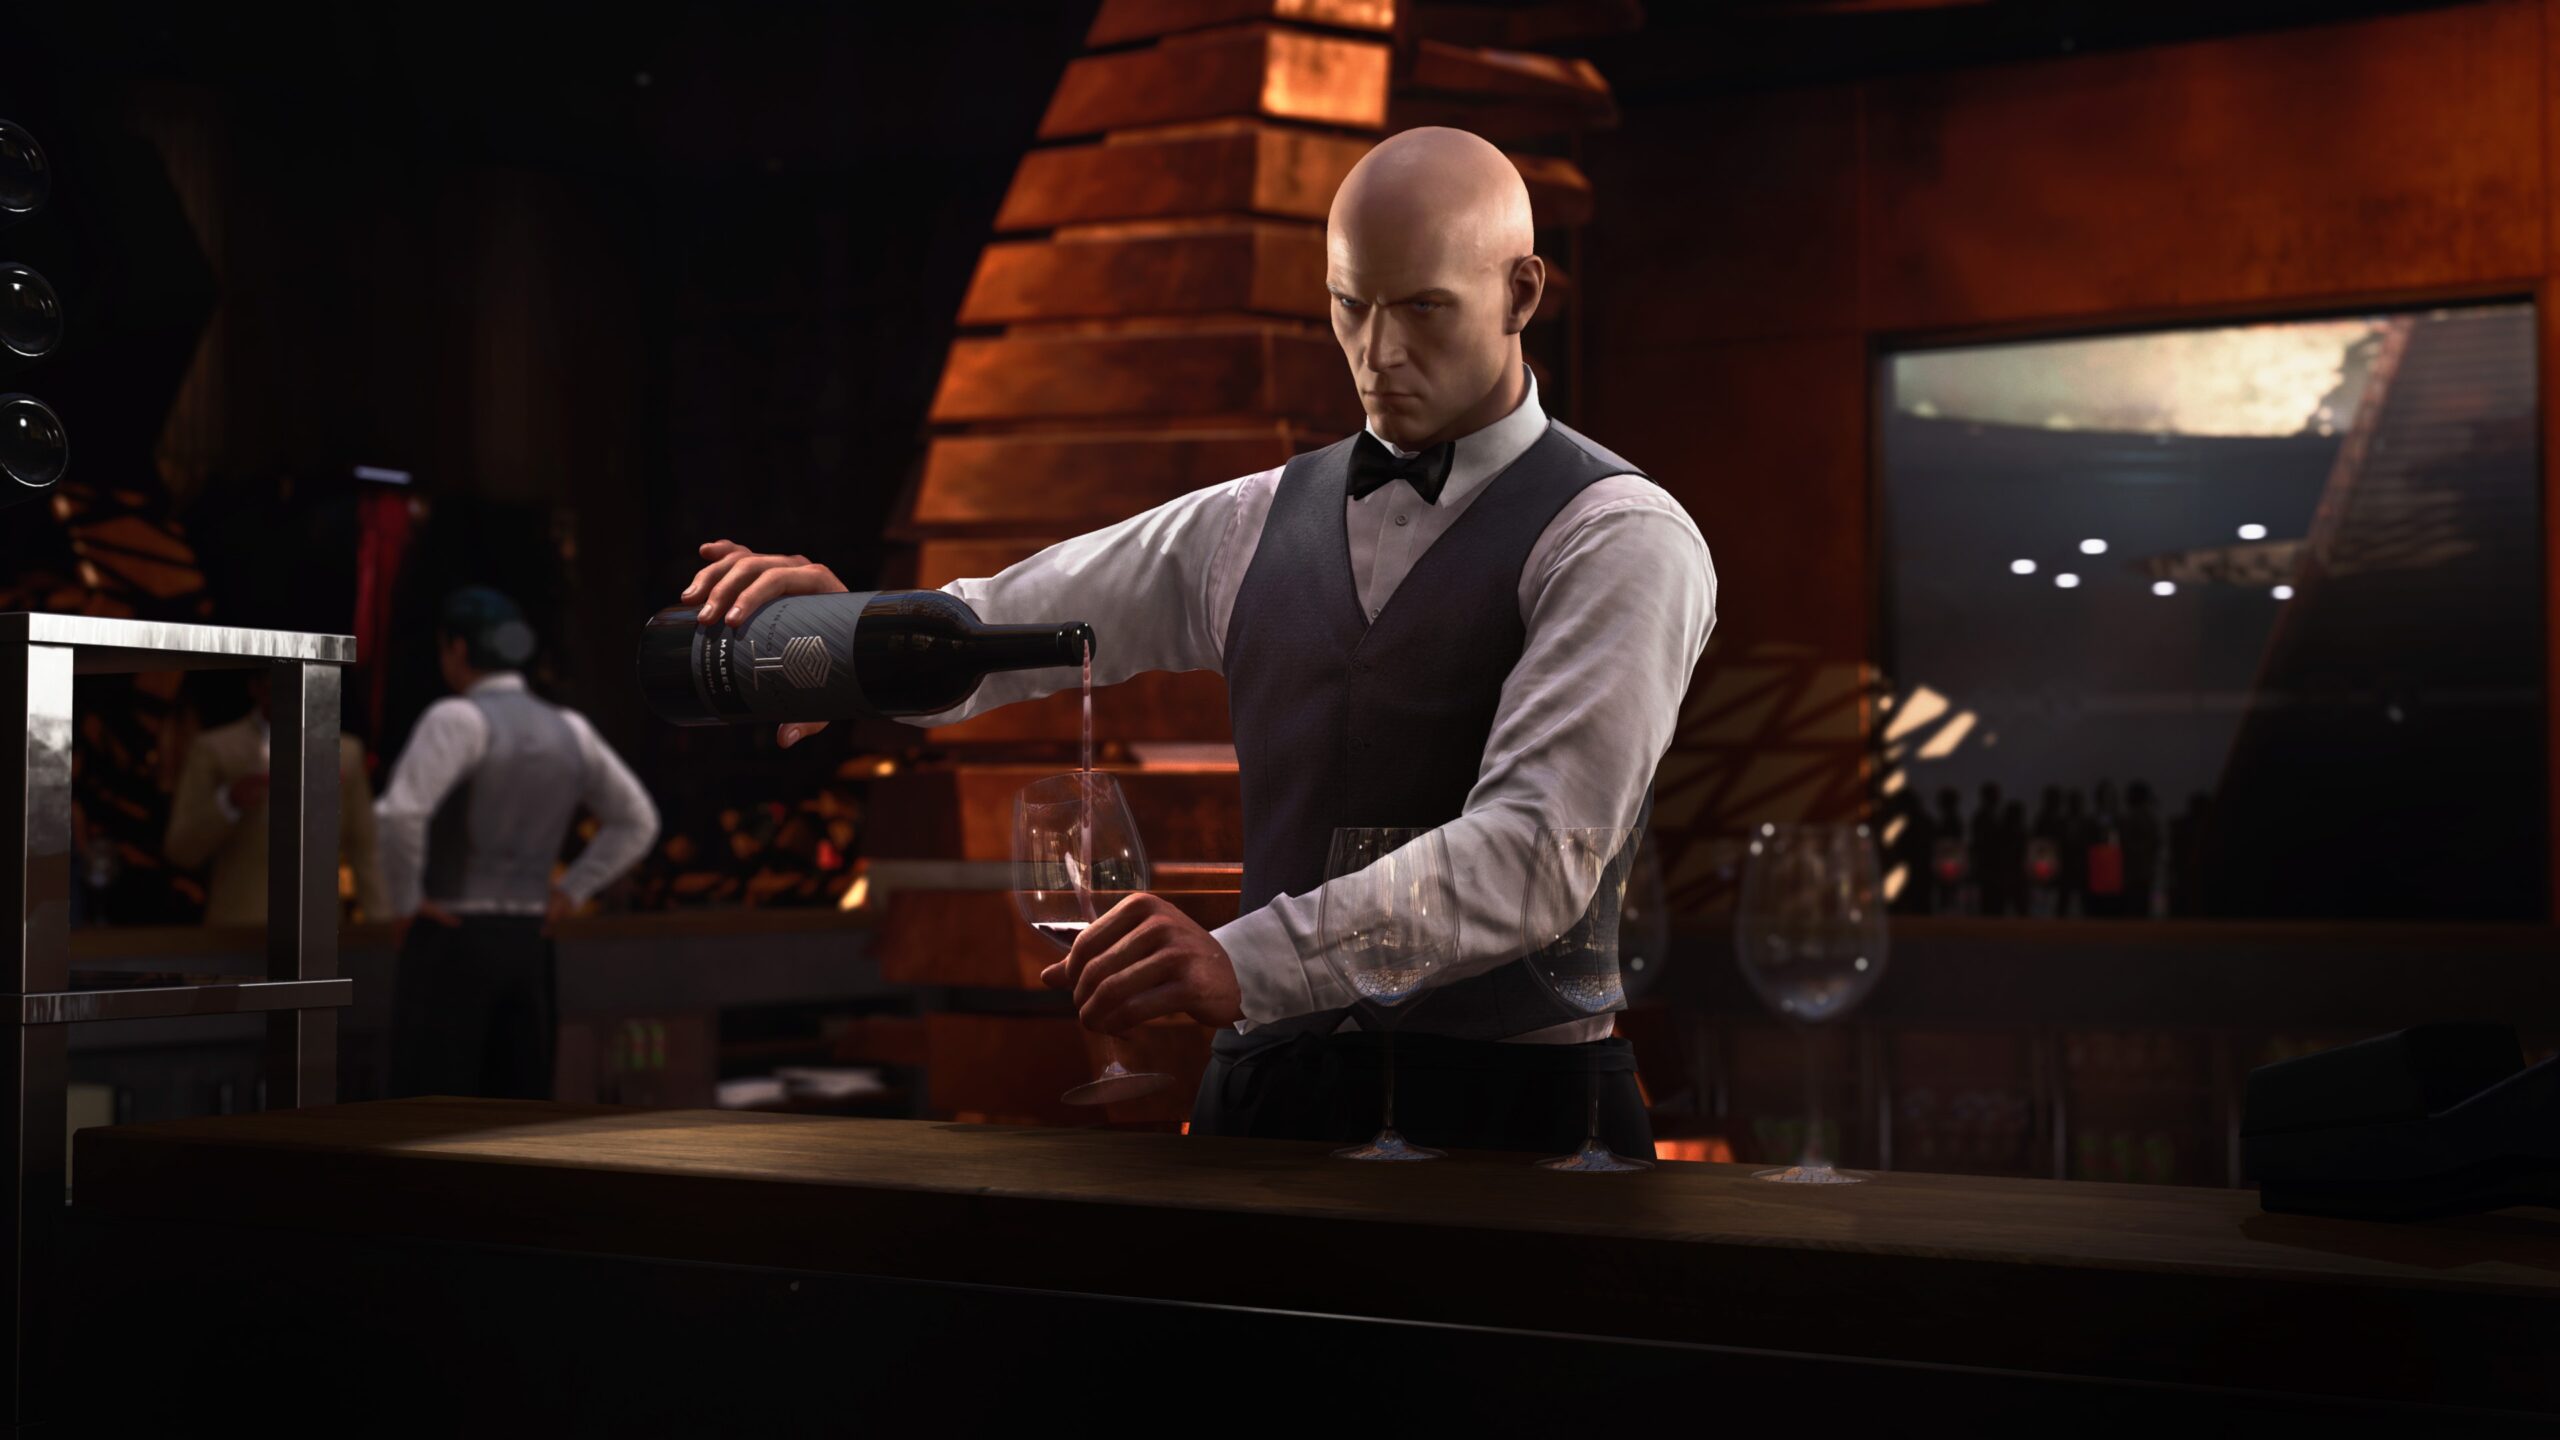 Hitman 3 Steam owners get free upgrades after IO ‘fails to meet expectations’ | VGC